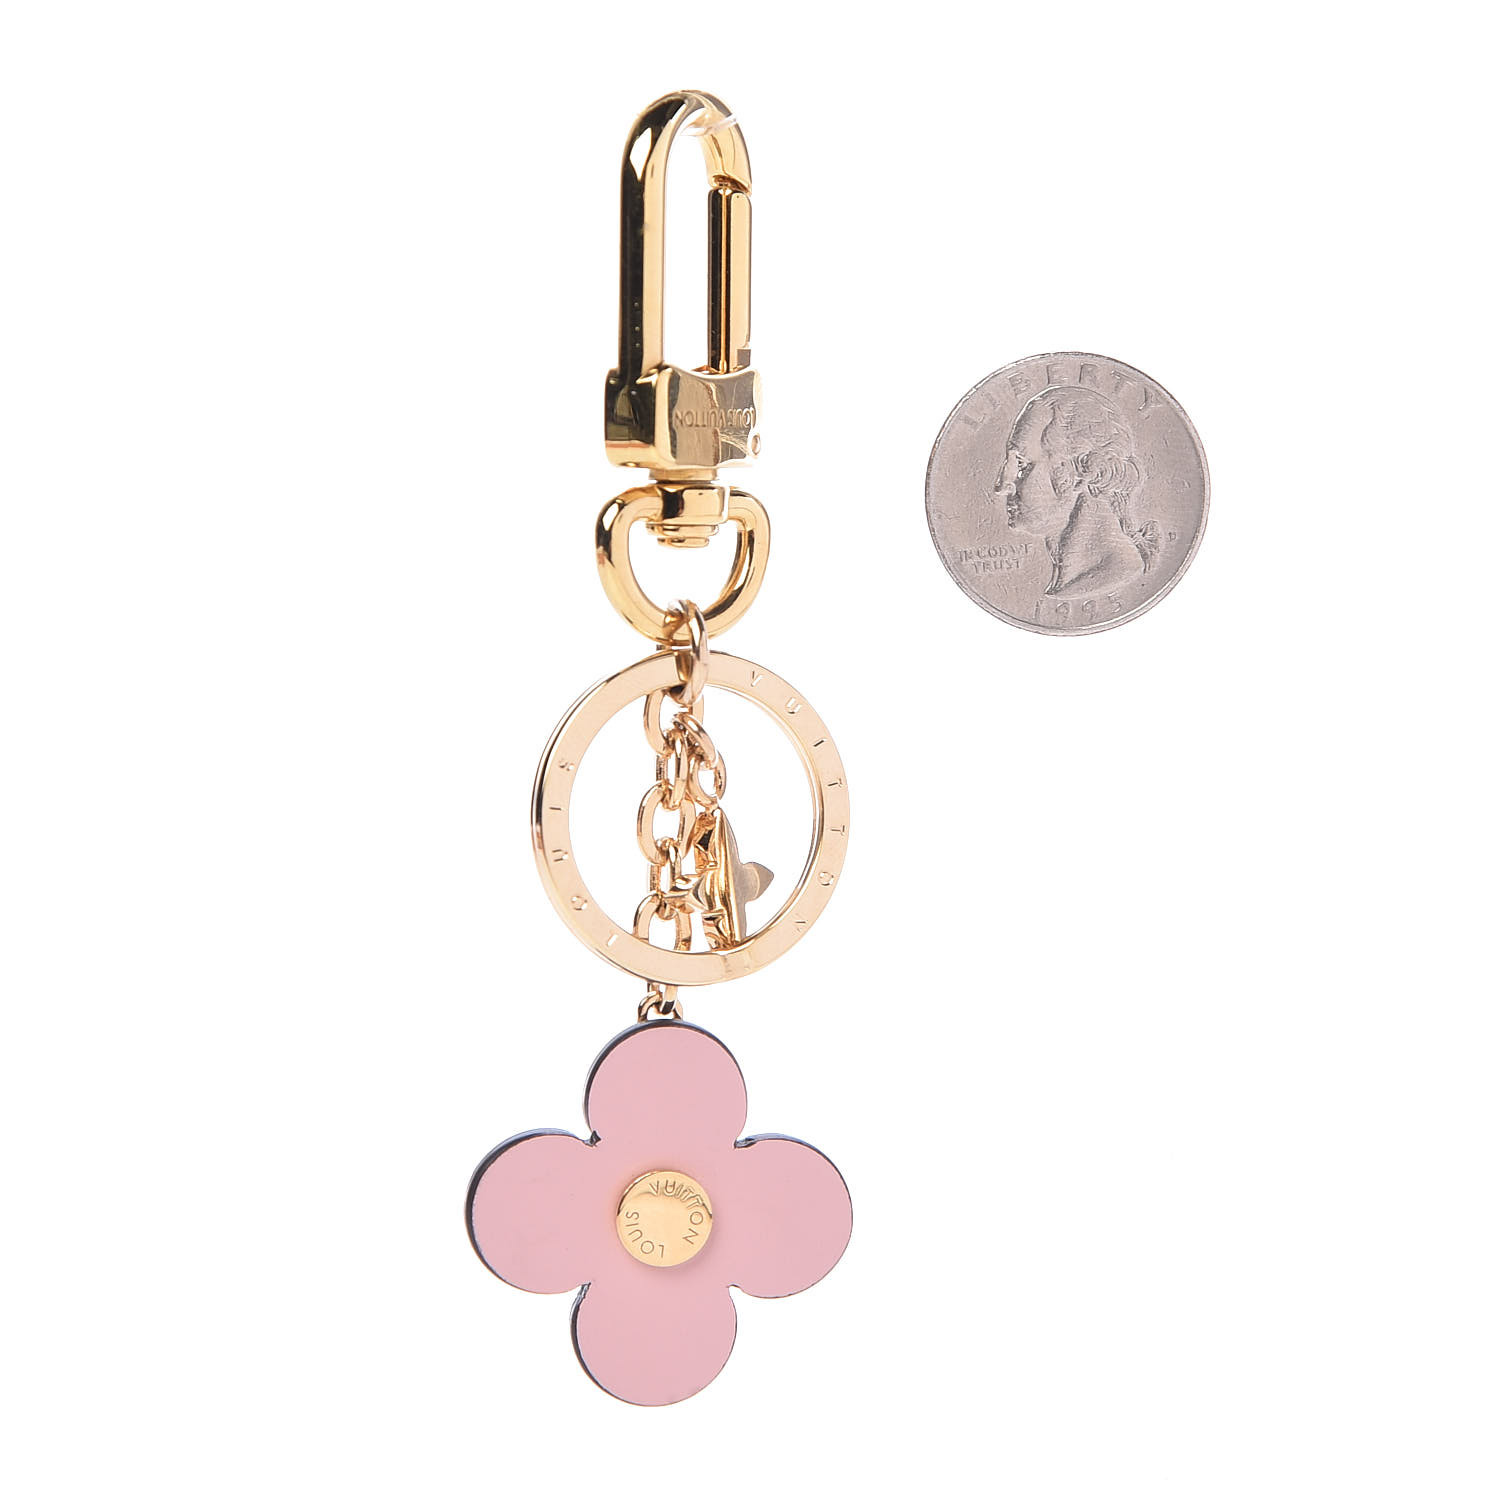 Louis Vuitton Blooming Flowers BB Bag Charm & Keyholder - Gold